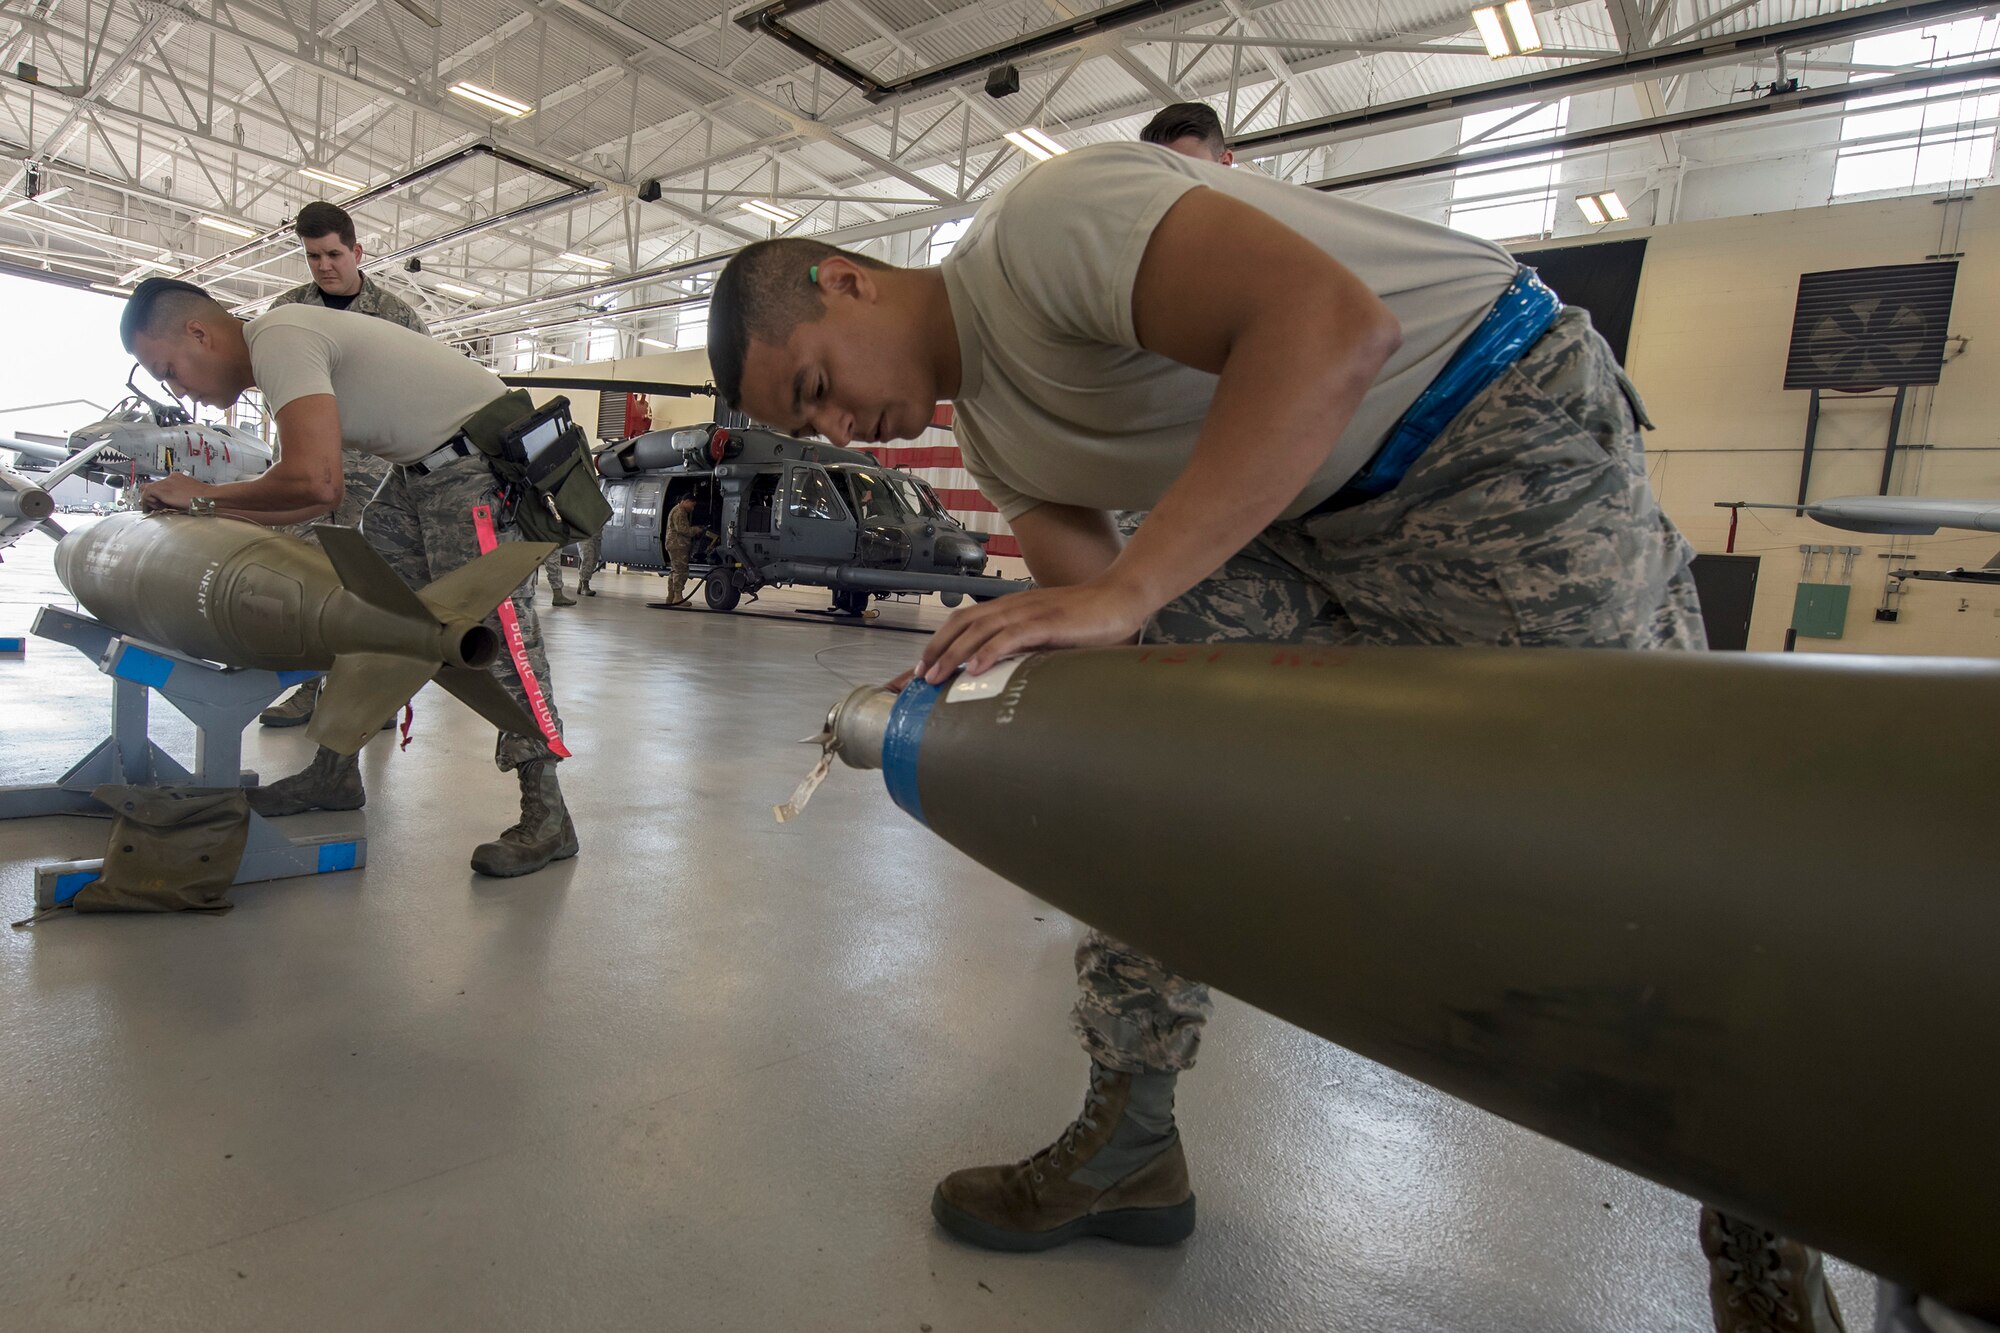 Senior Airman Luis Batista-Mercedes, right, 74th Aircraft Maintenance Unit (AMU) weapons load crew member and Staff Sgt. Jorge Galvez, 74th AMU weapons load crew team chief, check the umbilical component on inert MK-84 general purpose bombs during a weapons-load competition, April 6, 2018, at Moody Air Force Base, Ga. During the load portion of the competition Airmen from the 74th and 75th AMU were assessed on their ability to quickly and efficiently load munitions onto an A-10. They were also judged on dress and appearance and a written test based on munitions knowledge. (U.S. Air Force photo by Airman Eugene Oliver)